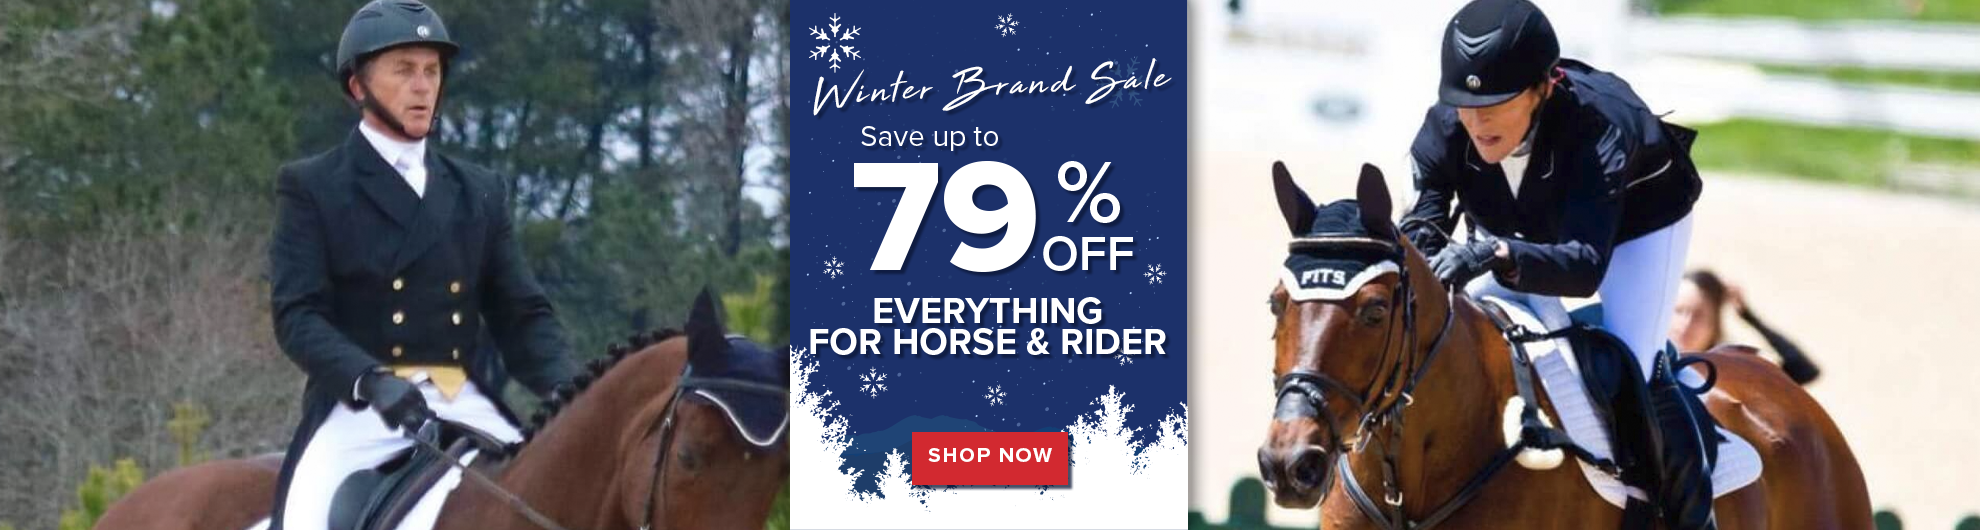 Christmas Sale for Hors & Rider